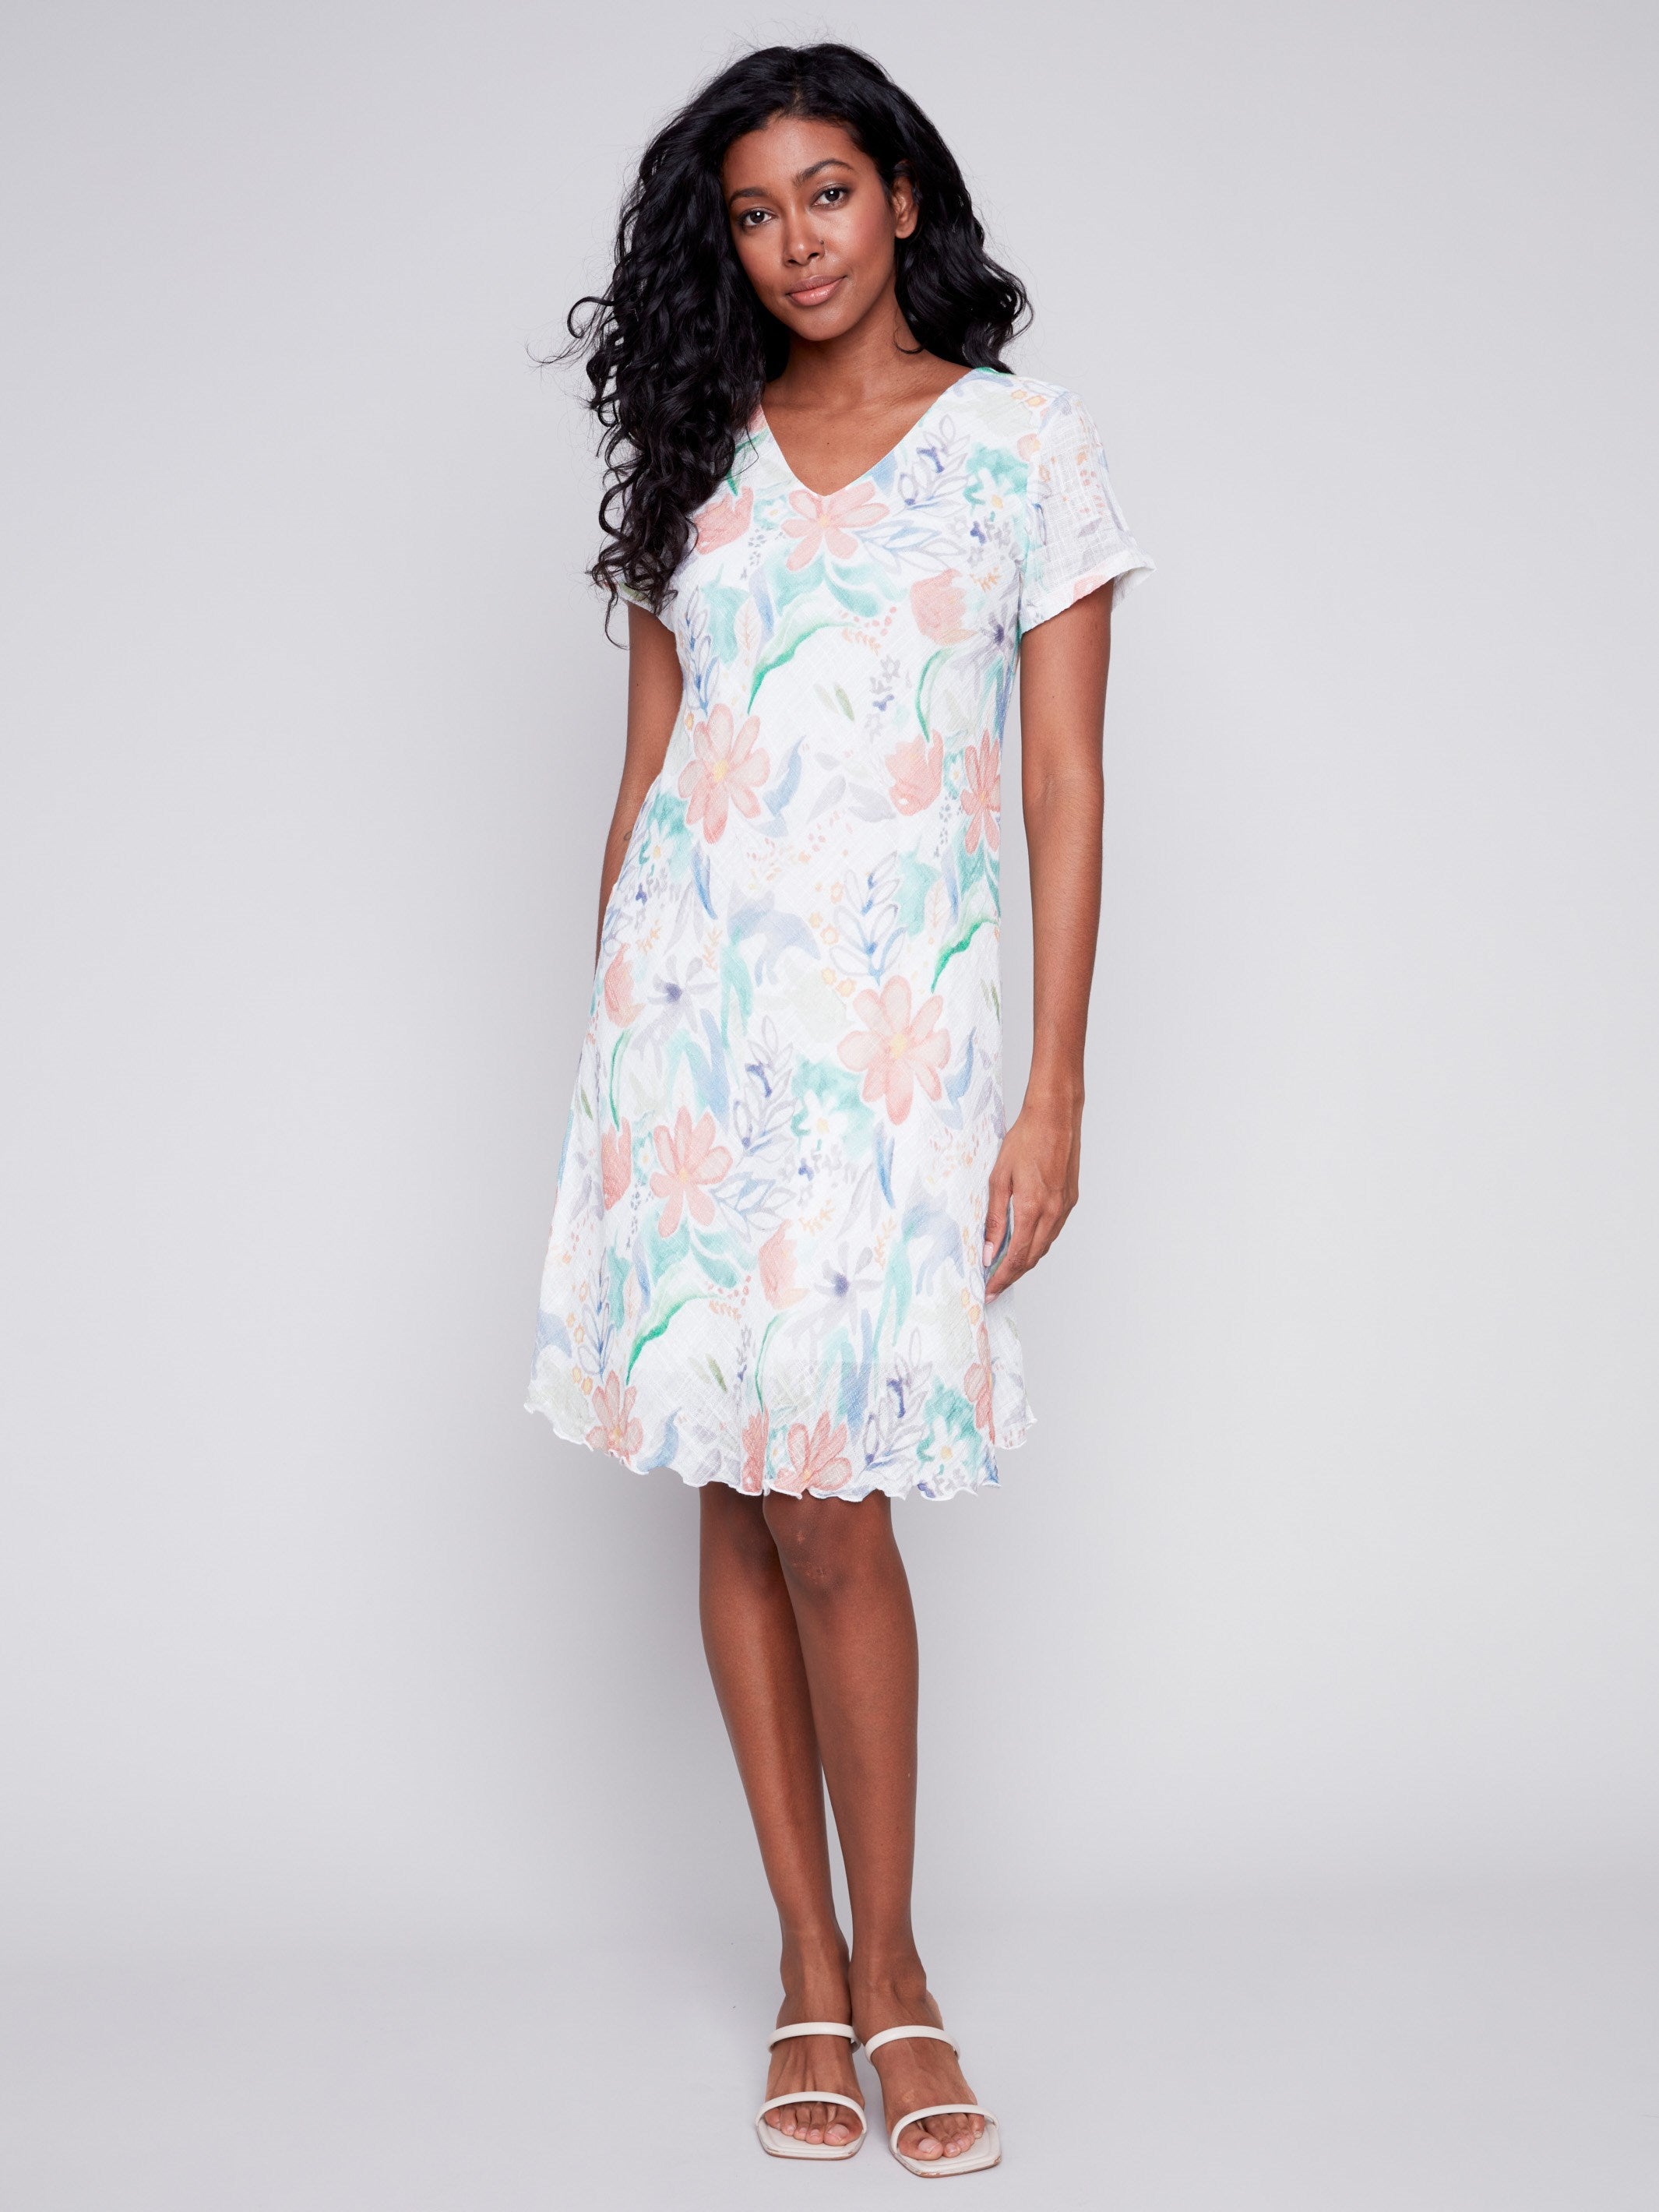 Cotton Gauze Dress with Bias Cut - Lotus - Charlie B Collection Canada - Image 2